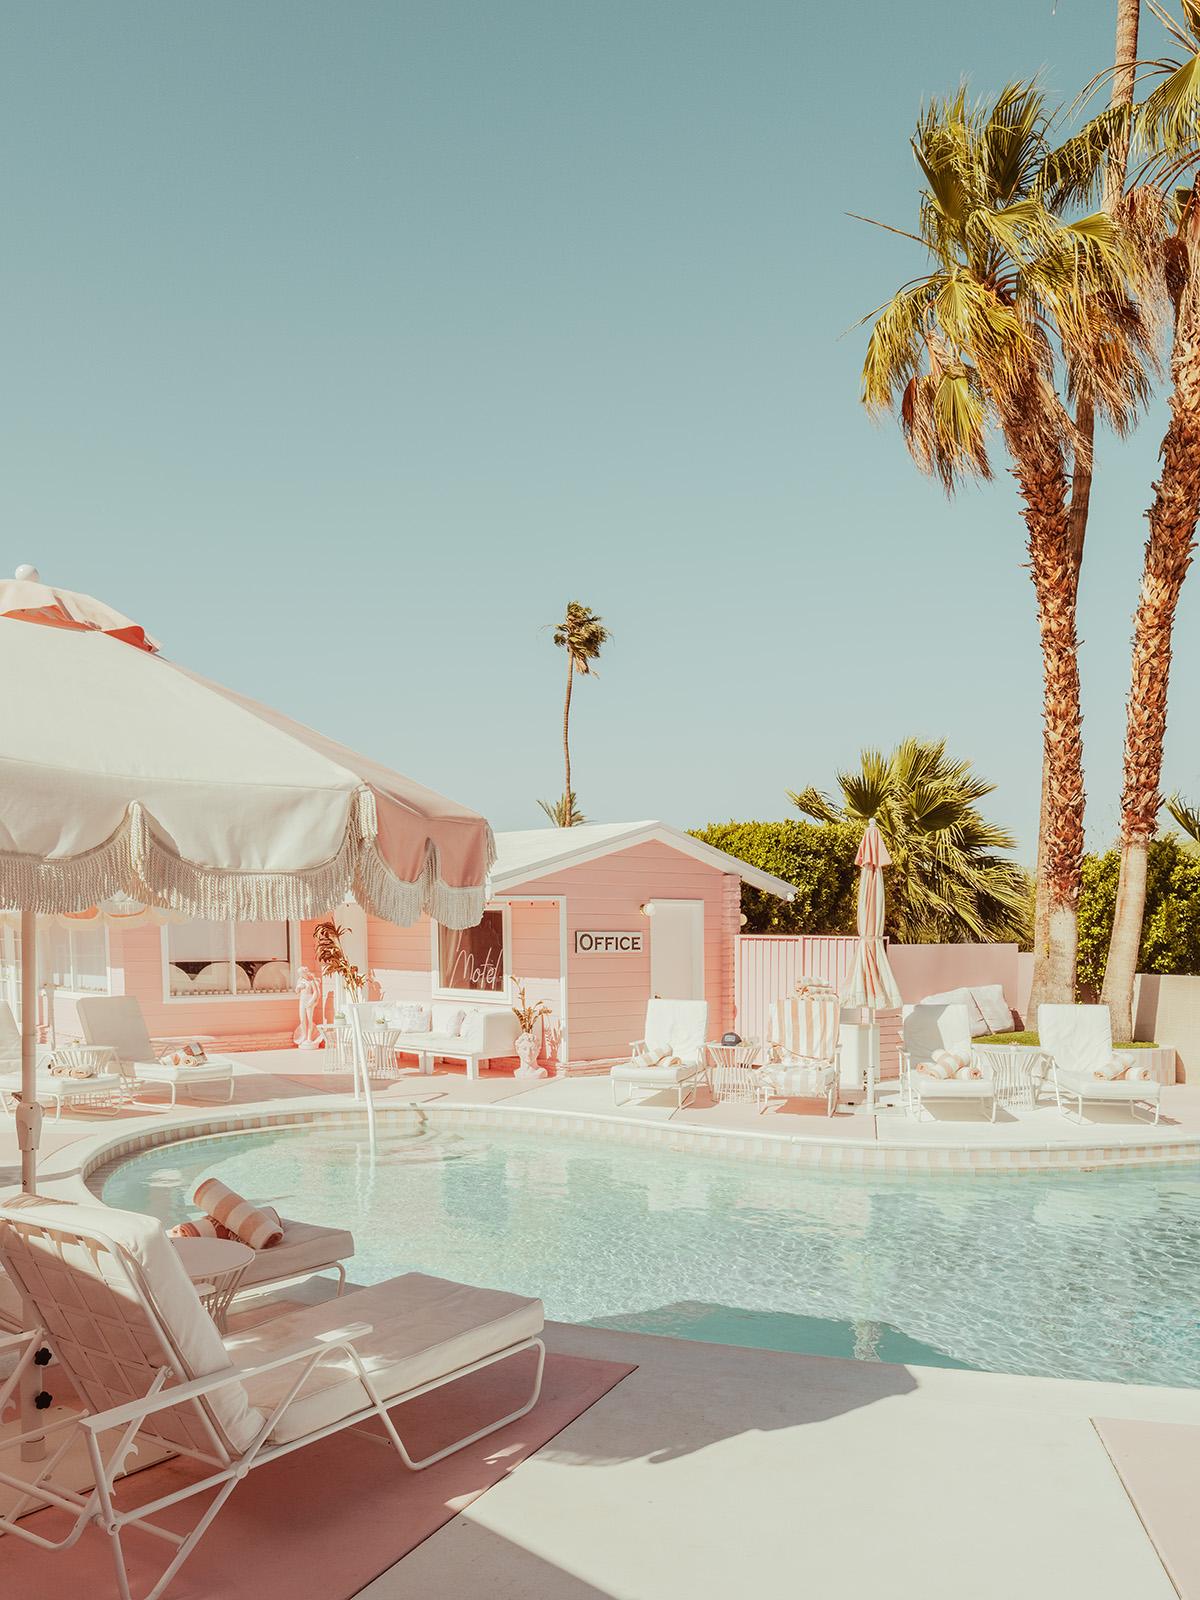 Ludwig Favre Landscape Photograph - The Pink Oasis Motel